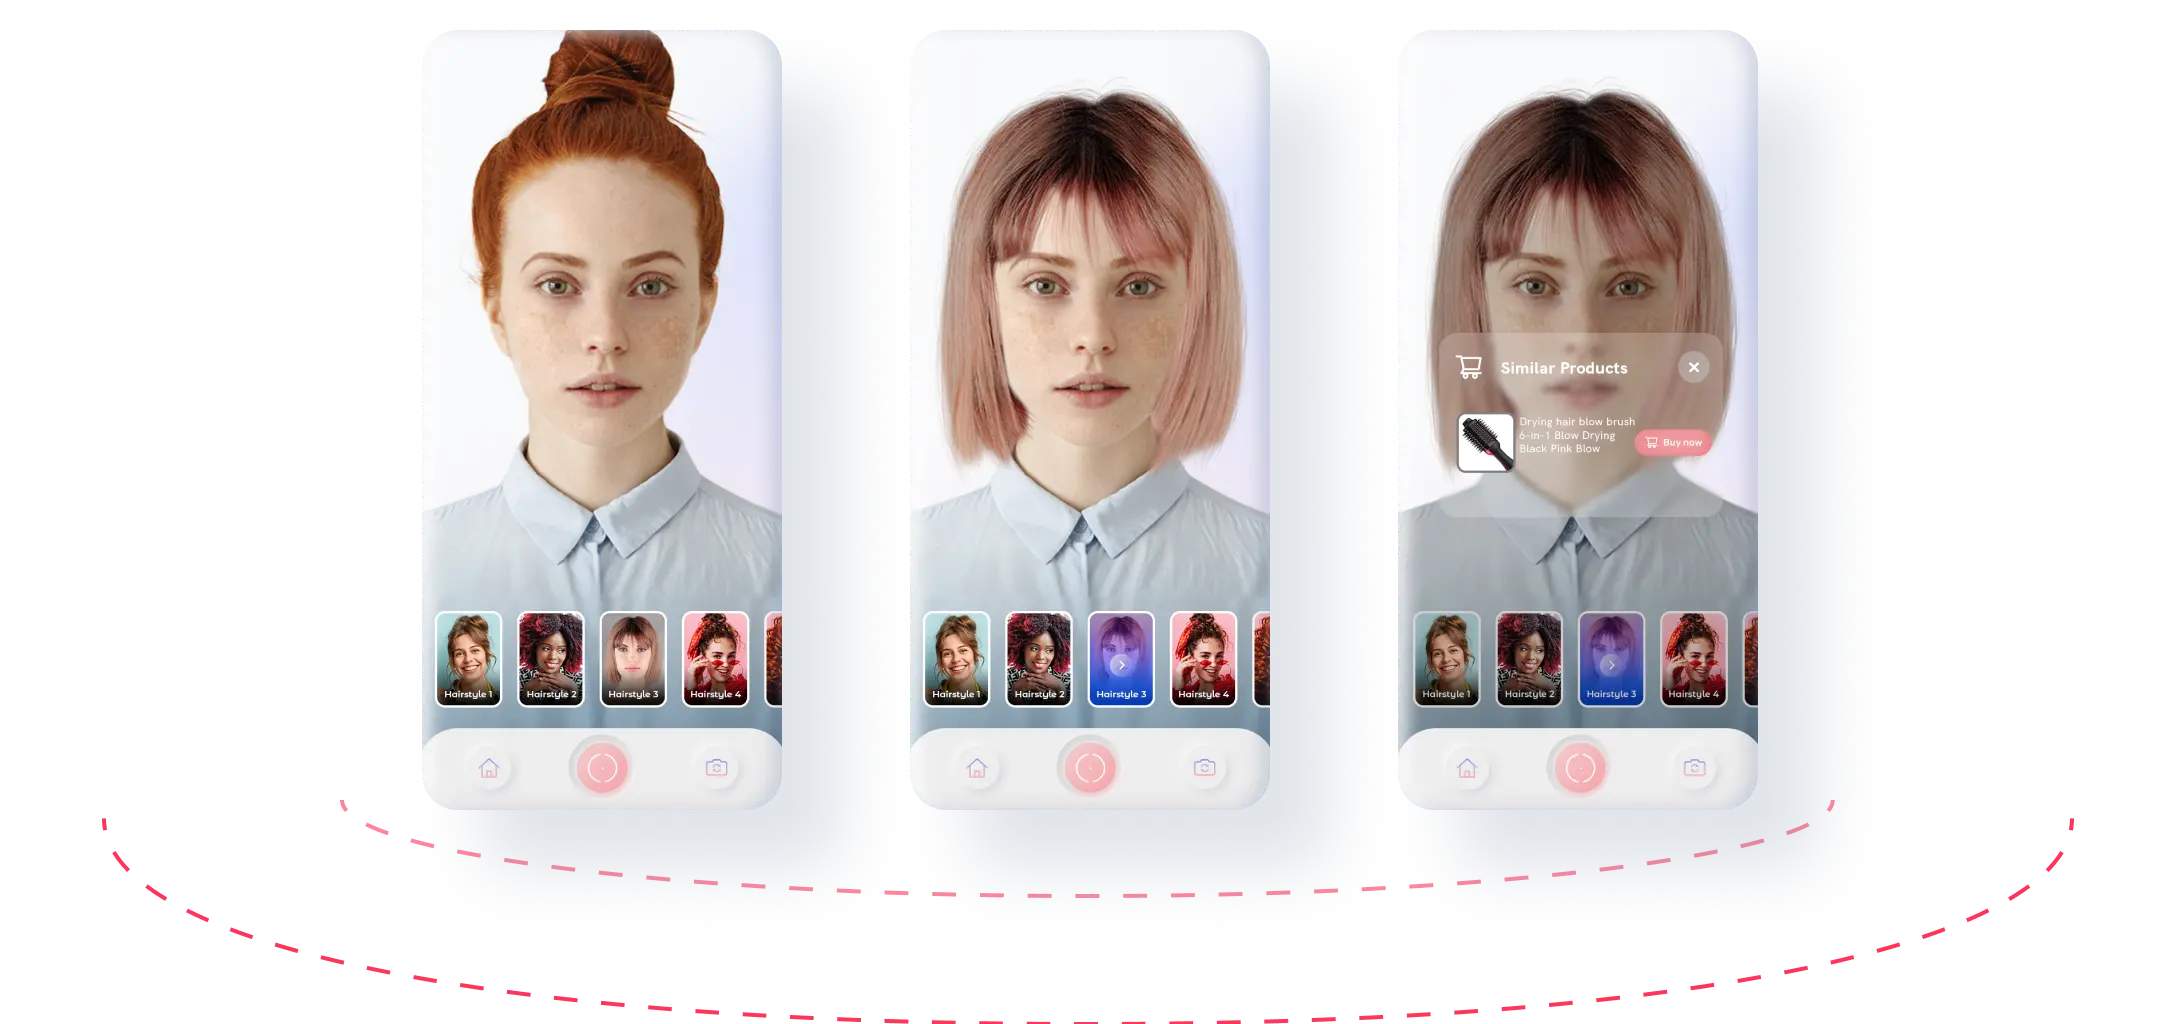 A girl trying virtual hairstyle try-on of Orbo AI in an app and a hairbrush is recommended to her based on her selection